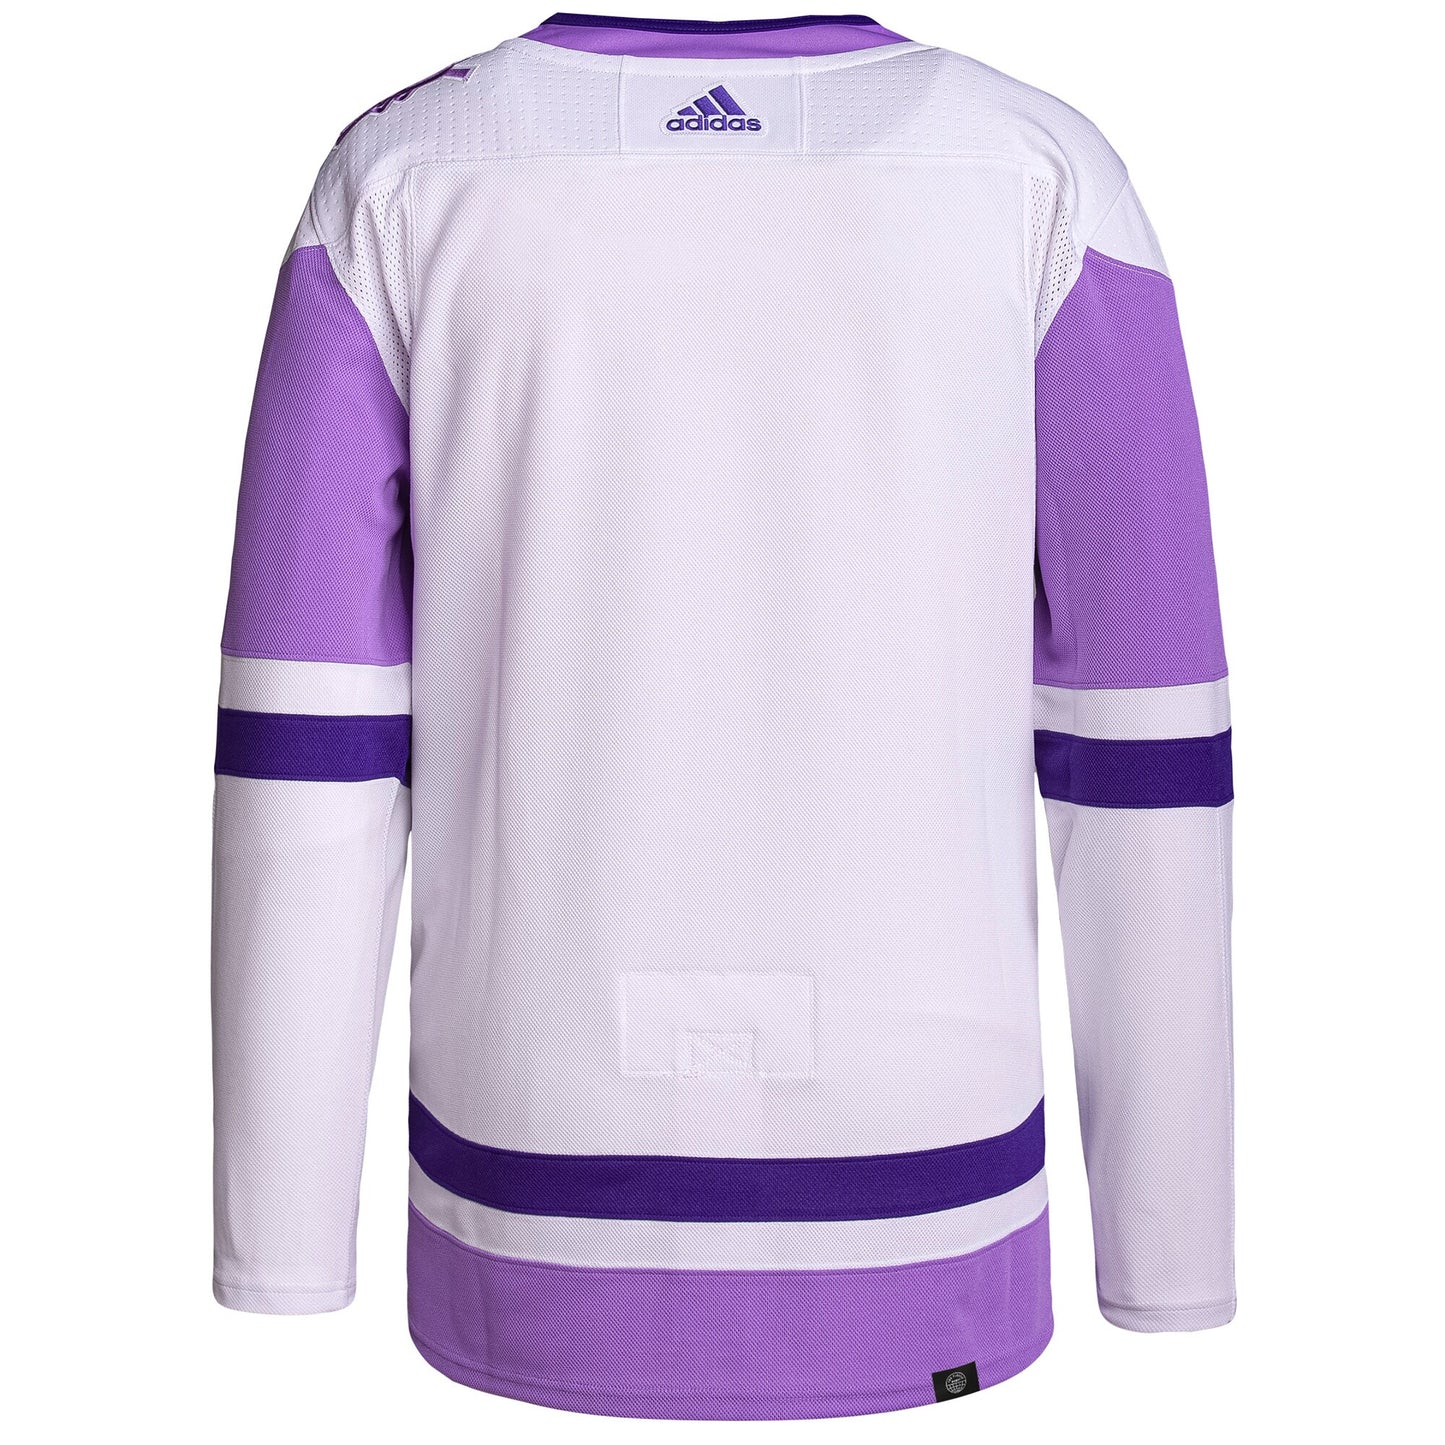 Vancouver Canucks adidas Hockey Fights Cancer Primegreen Authentic Blank Practice Jersey - White/Purple